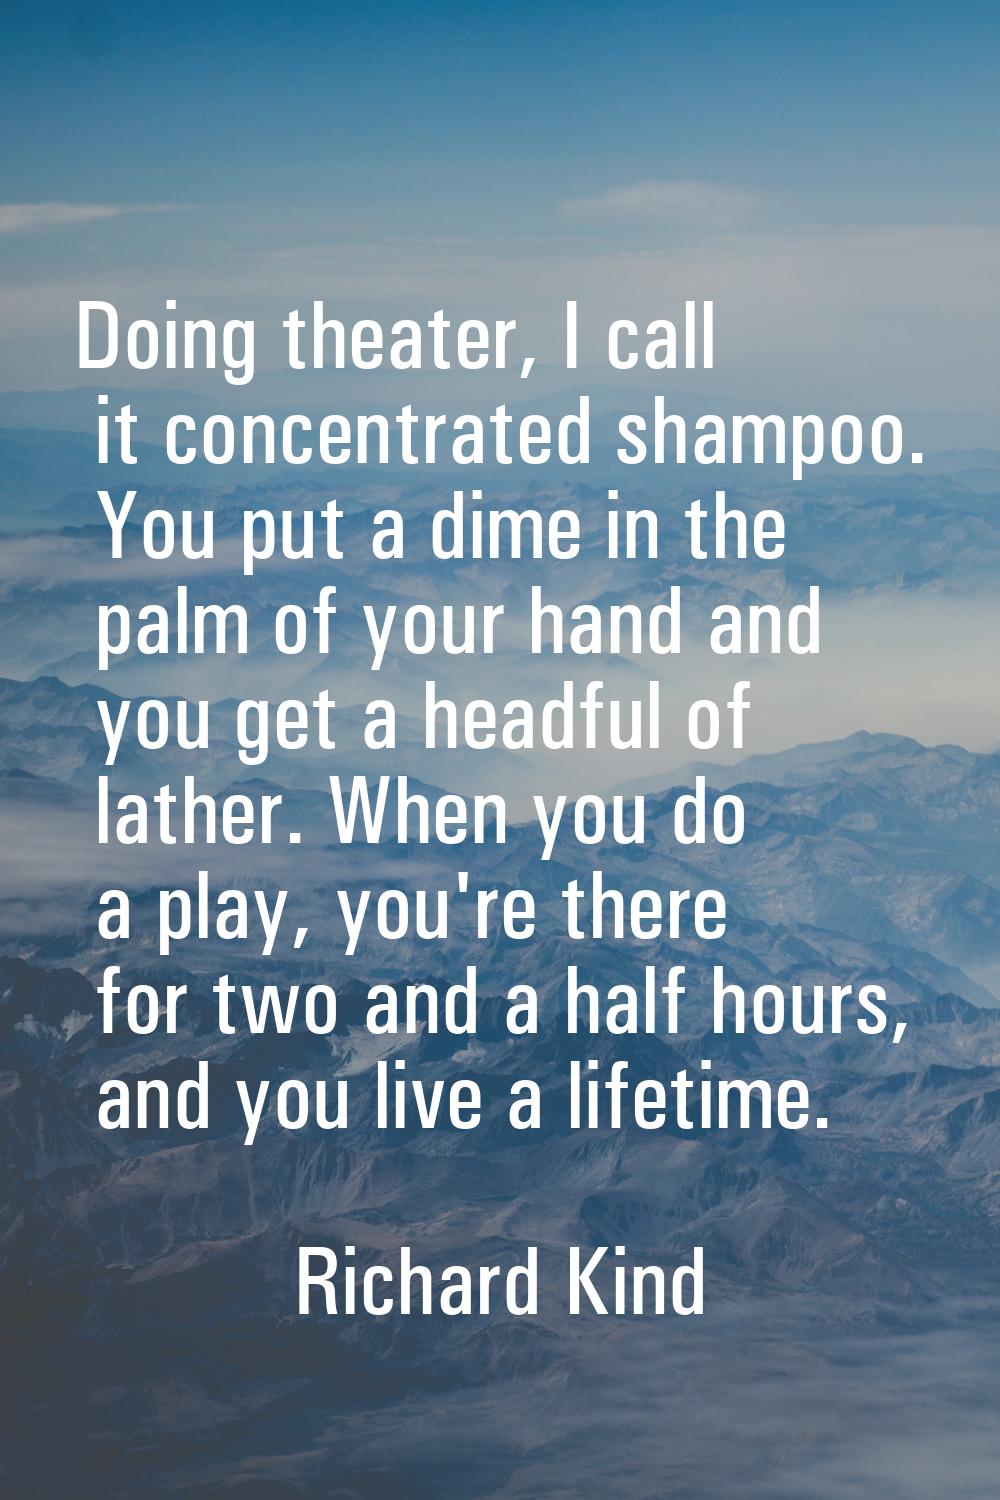 Doing theater, I call it concentrated shampoo. You put a dime in the palm of your hand and you get 